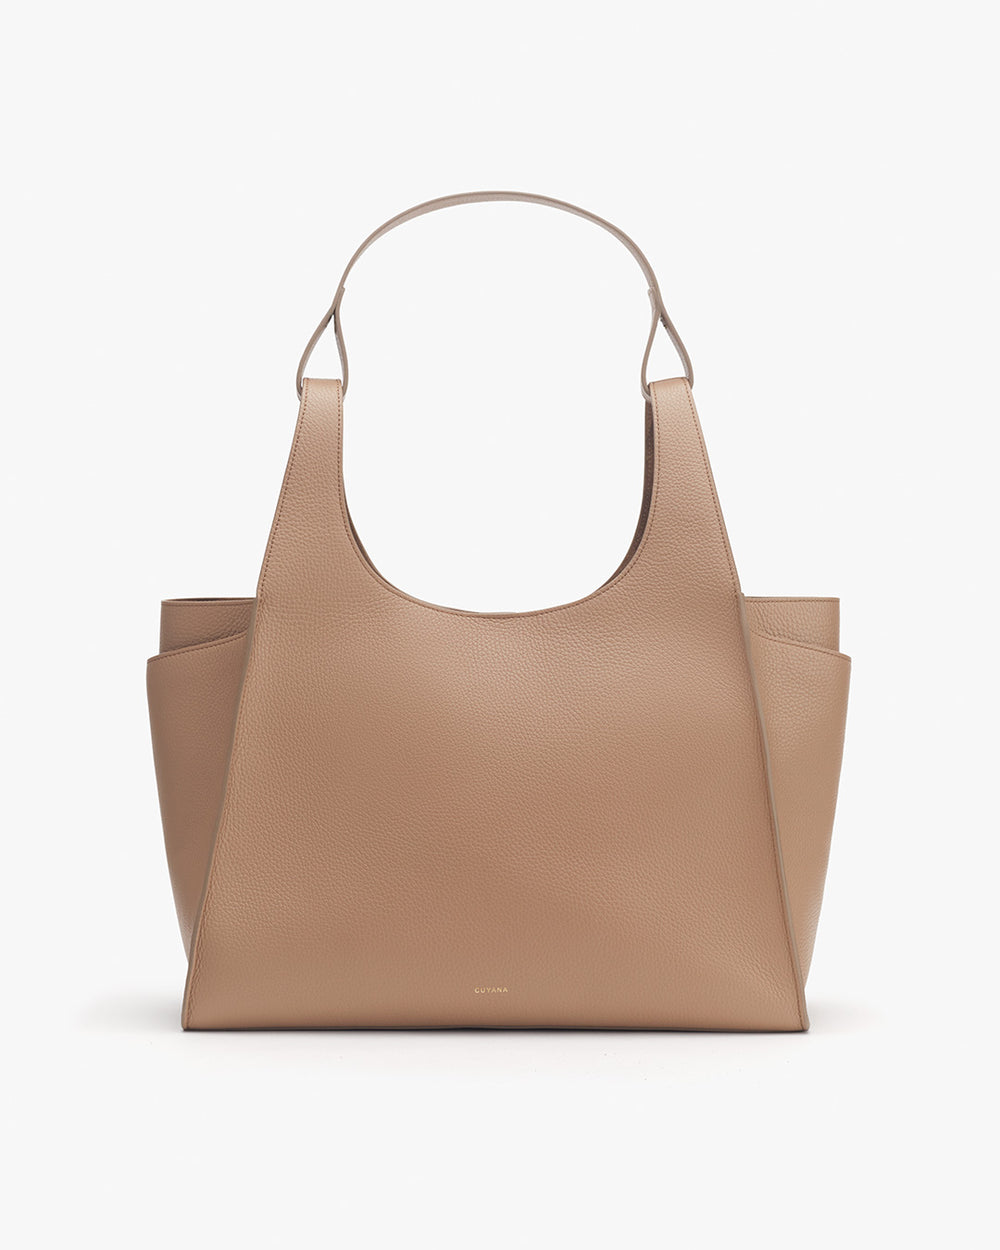 A handbag with a central handle and additional side compartments.